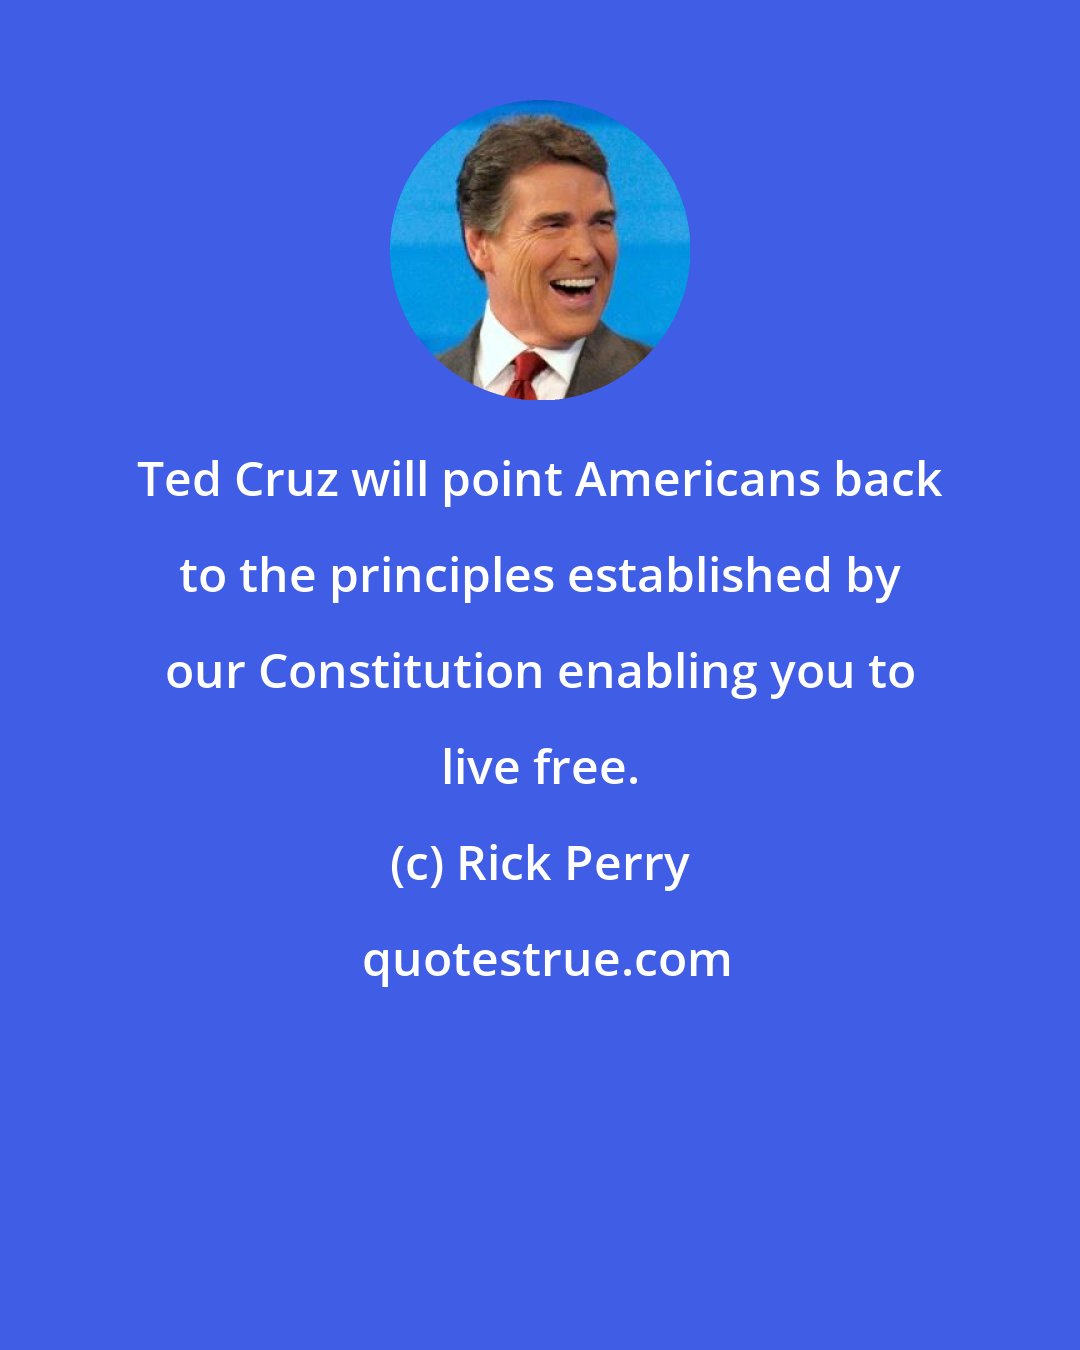 Rick Perry: Ted Cruz will point Americans back to the principles established by our Constitution enabling you to live free.